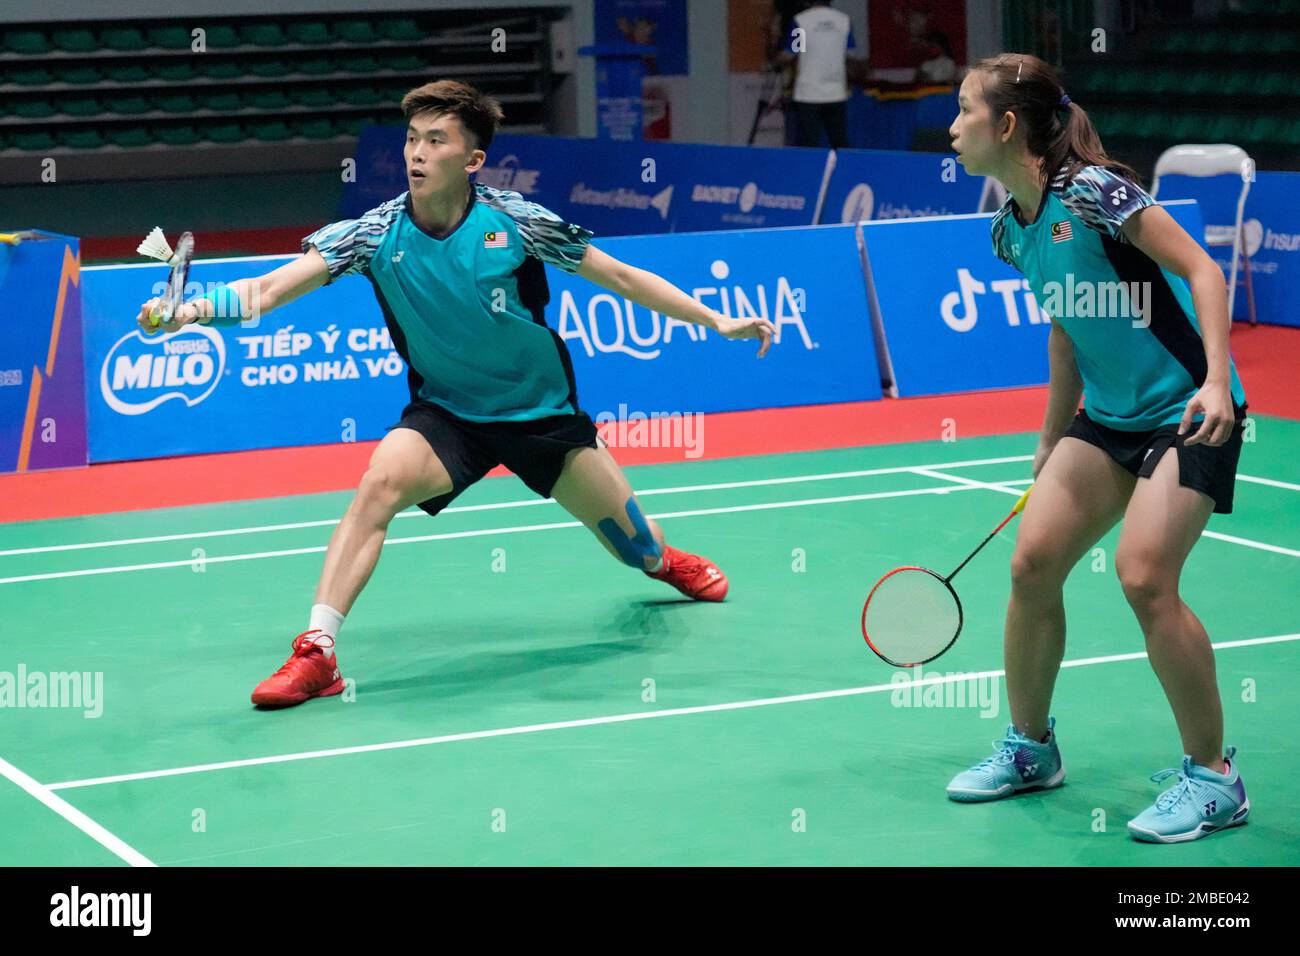 Malaysias Hoo Pang Ron, left, and Cheah Yee See compete against their compatriots Chen Tang Jie and Peck Yen Wei during their mixed doubles badminton final match at the 31st Southeast Asian